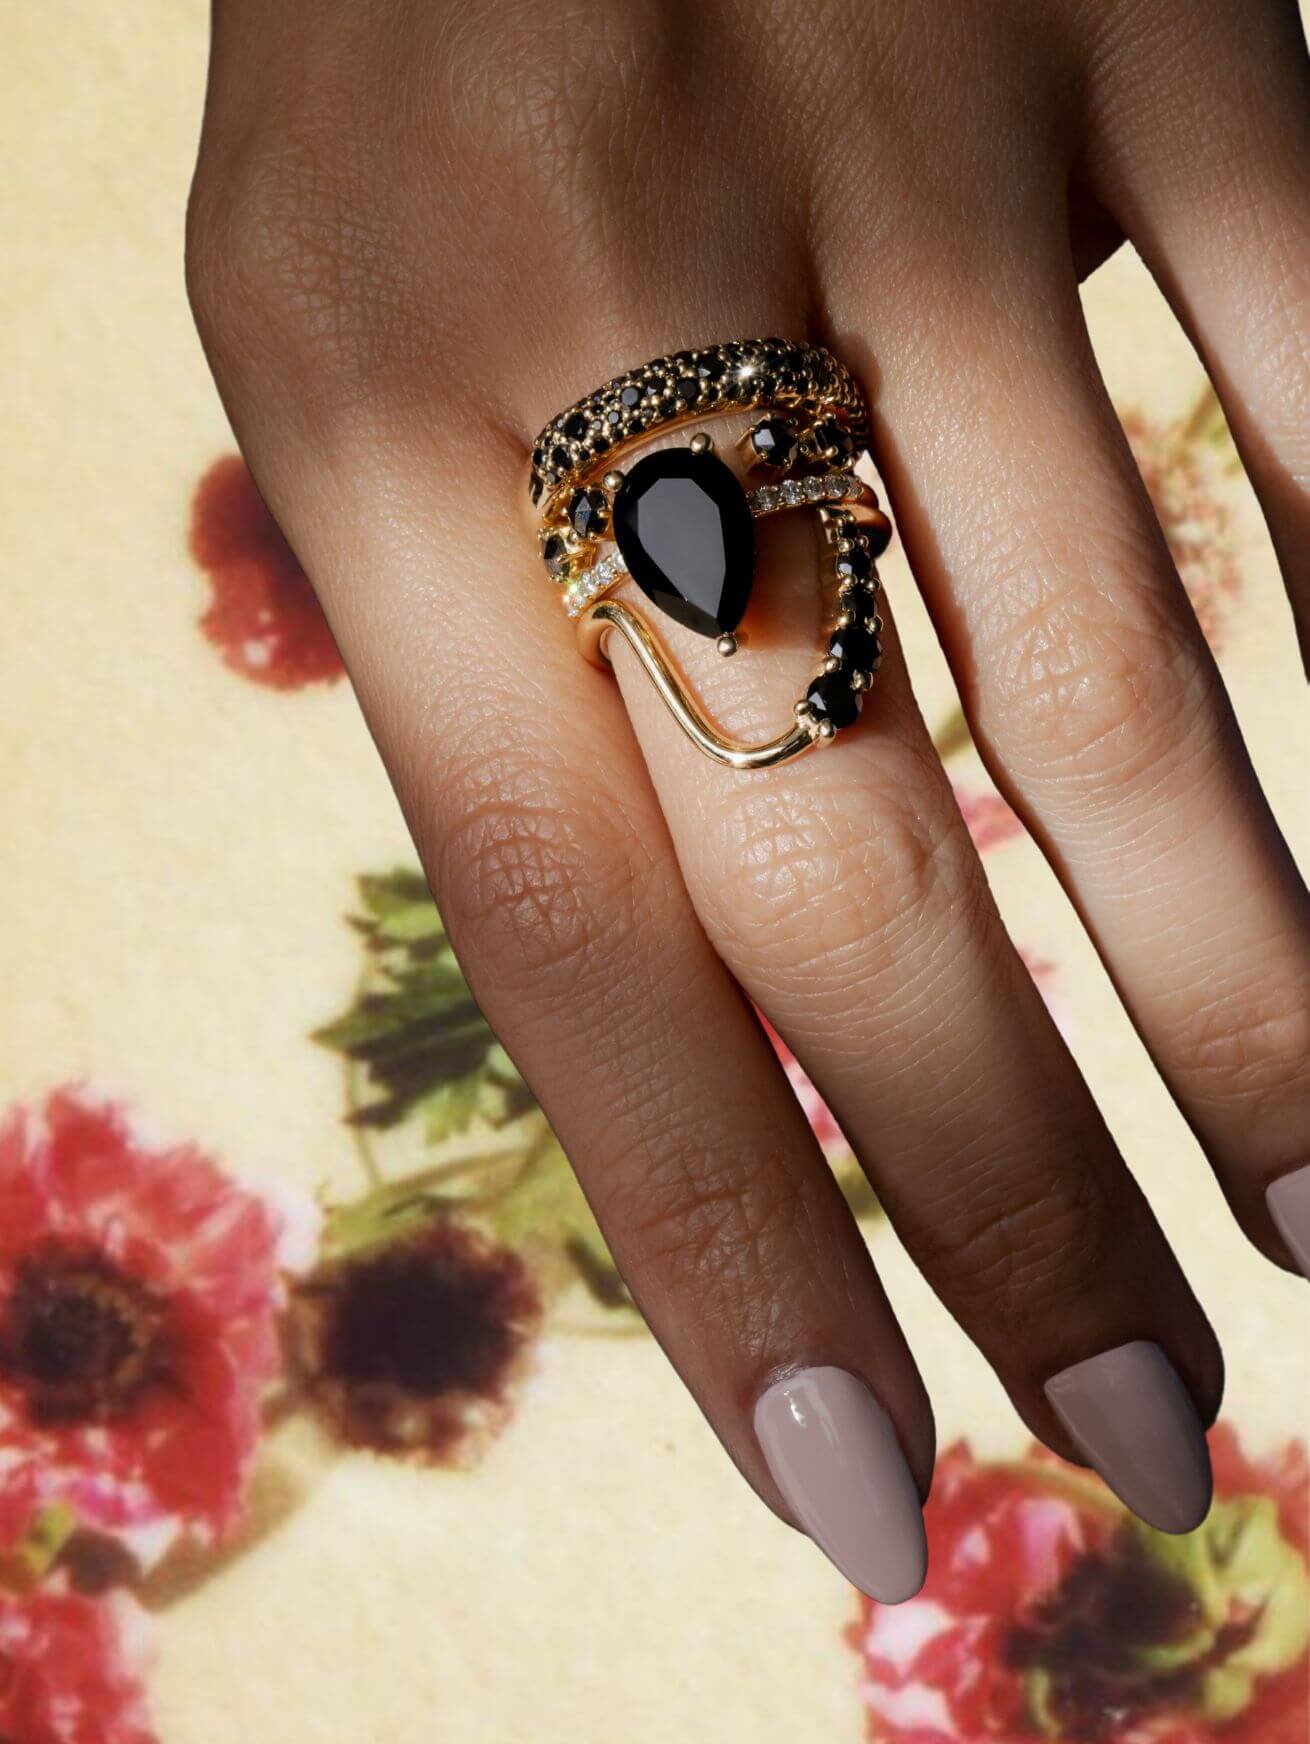 Close up of hands with black diamond and onyx ring stack with background removed over flowers.